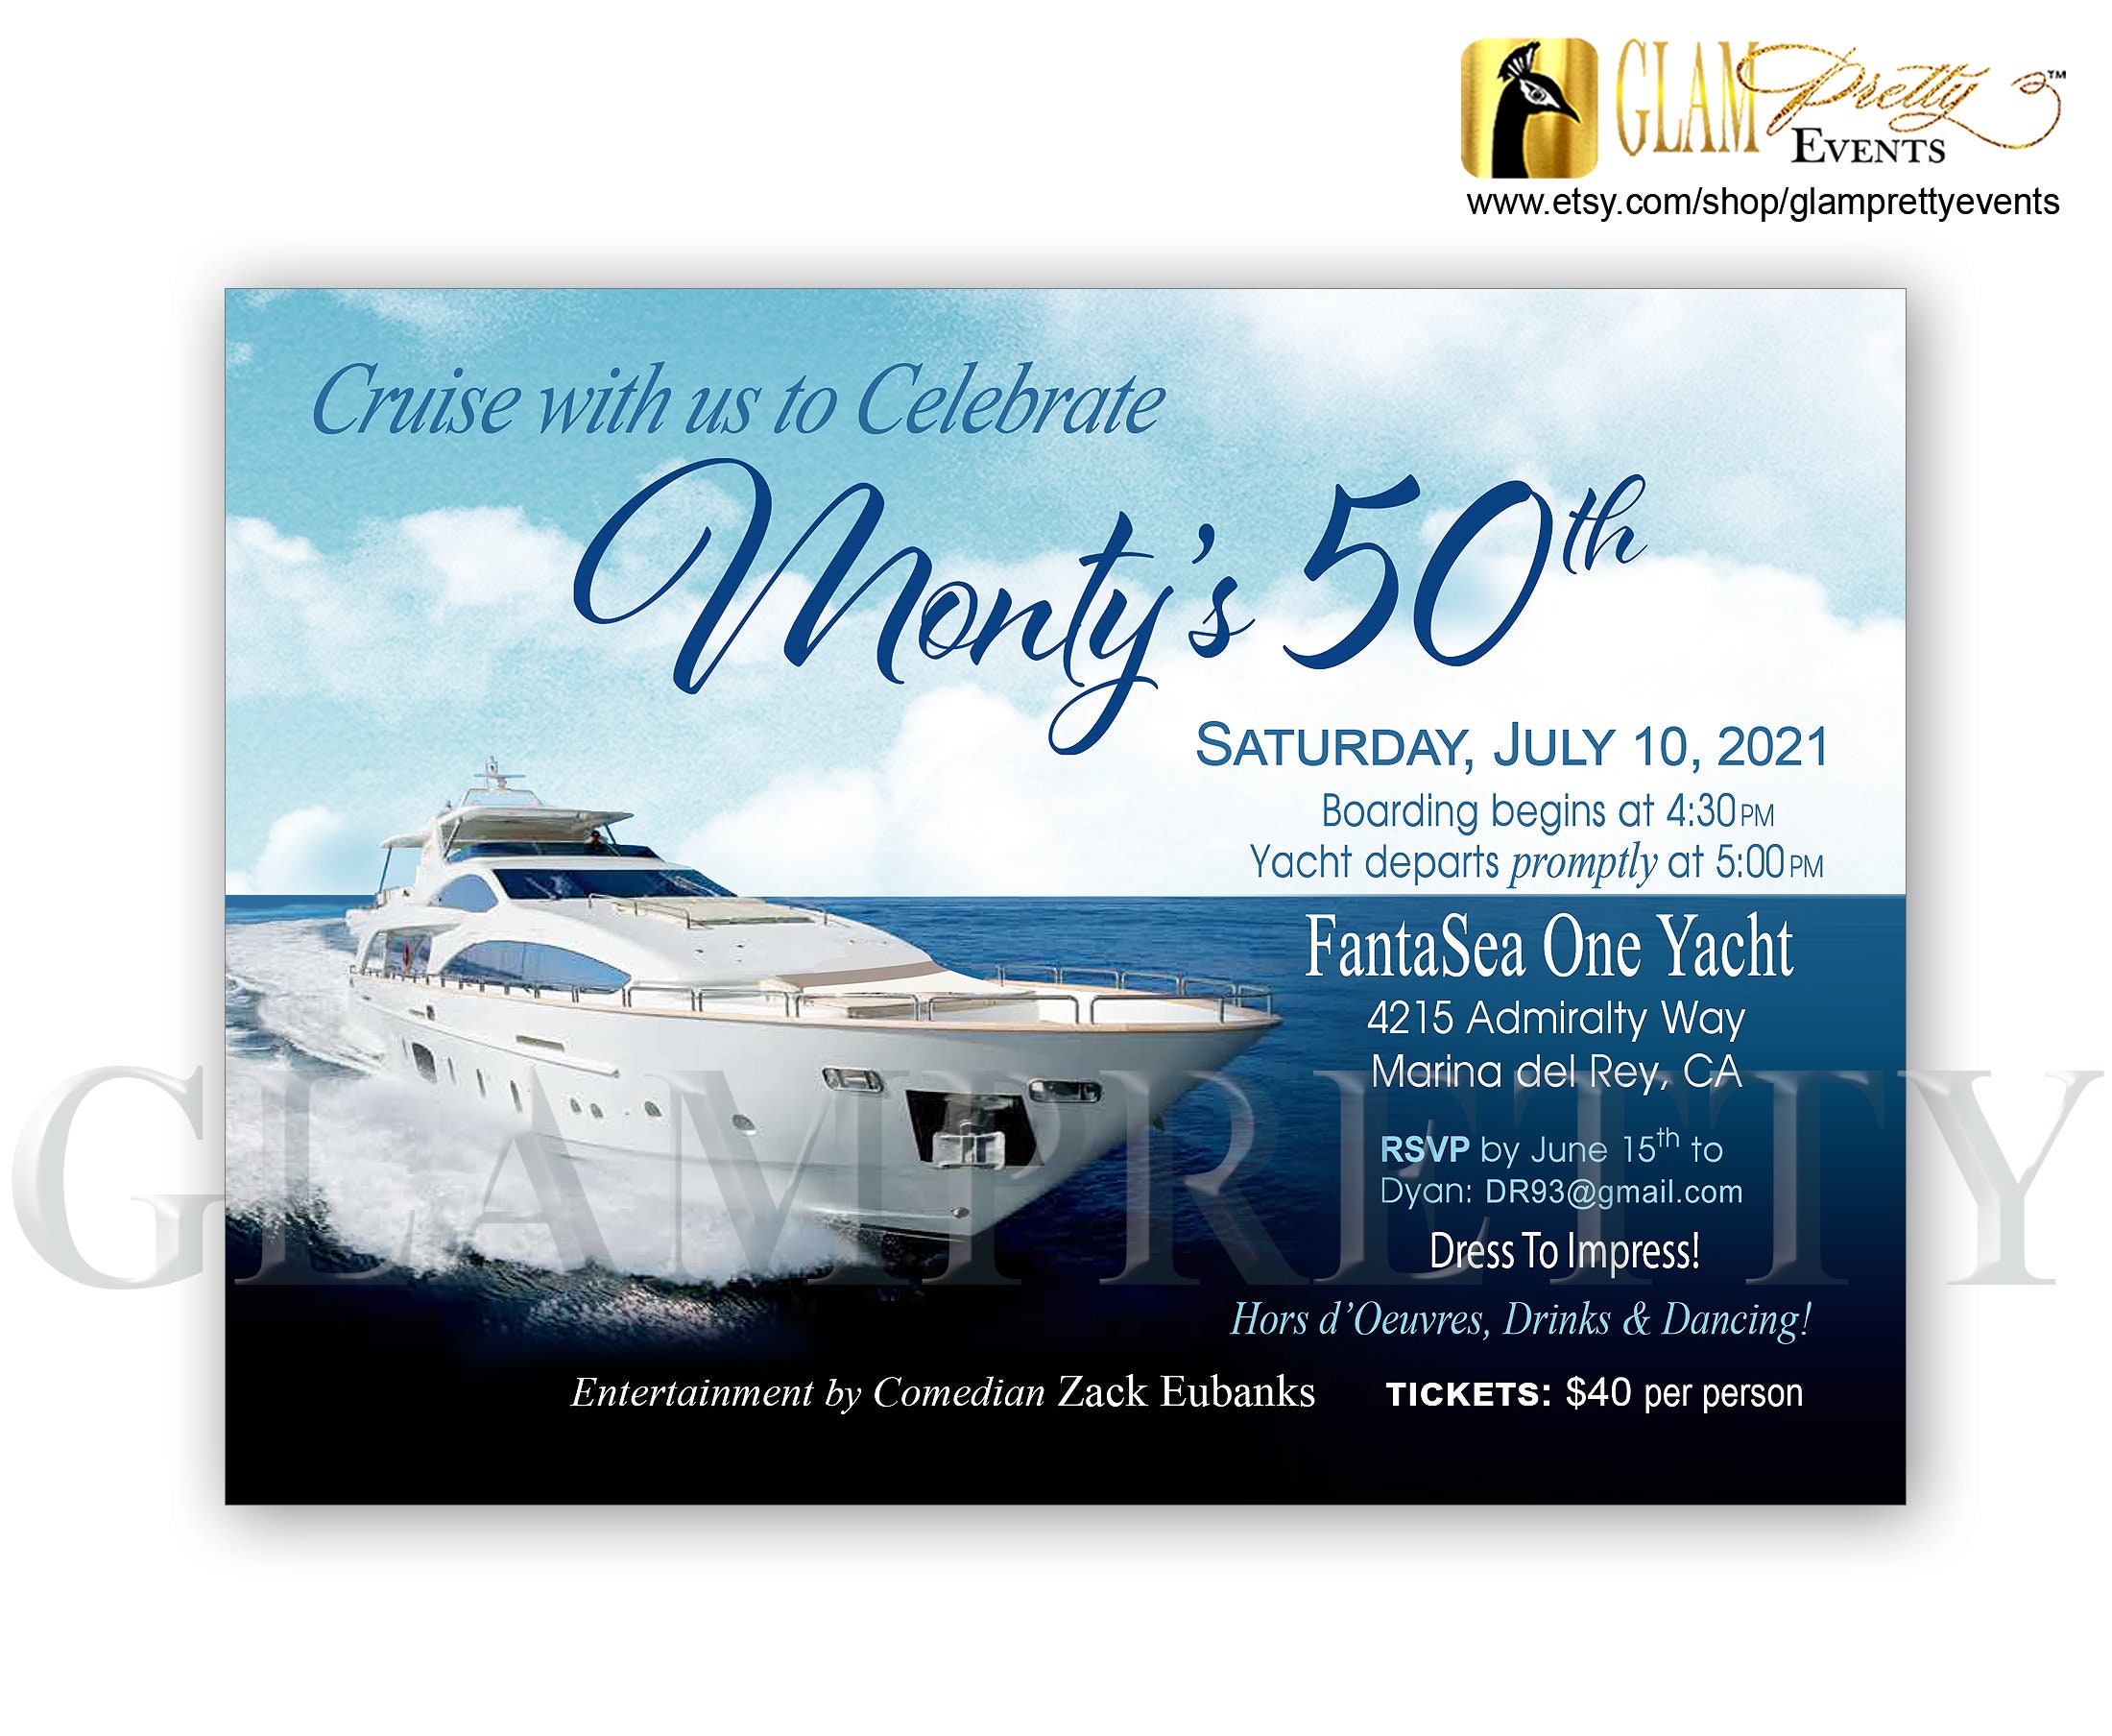 50th birthday party on a yacht